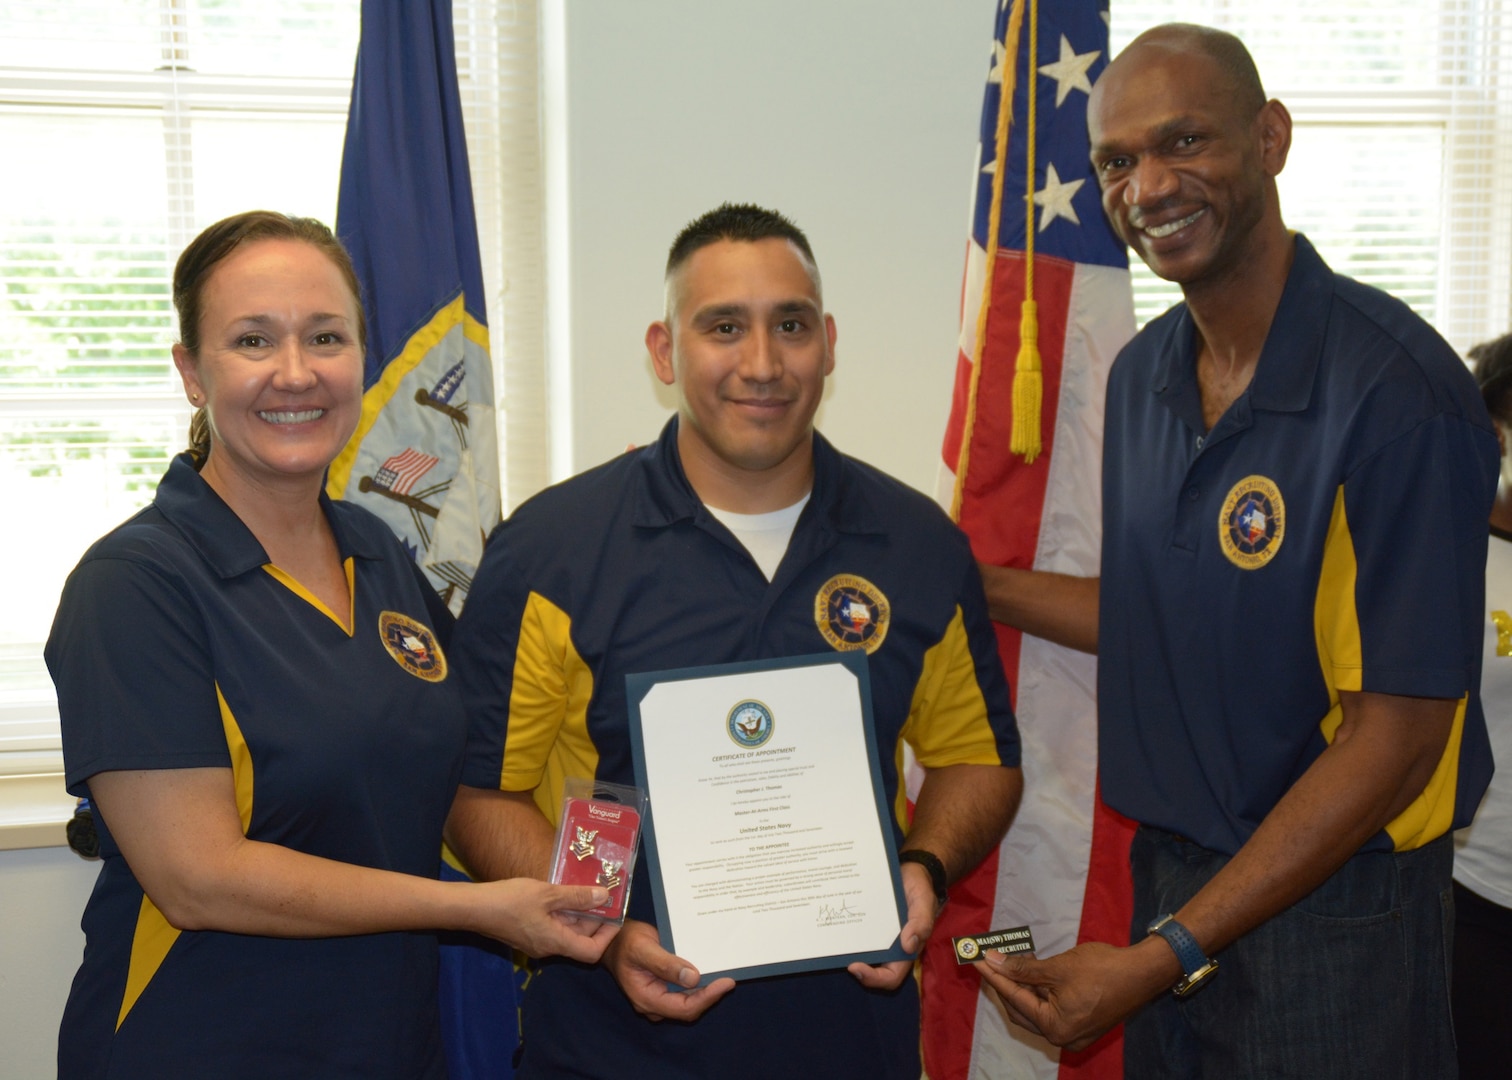 Former Commanding Officer Cmdr. Karen Muntean, Navy Recruiting District San Antonio and Command Master Chief Eric Mays stand with newly promoted Master-at-Arms 1st Class Christopher Thomas who was advanced to his current rank through the Navy’s Meritorious Advancement Program.